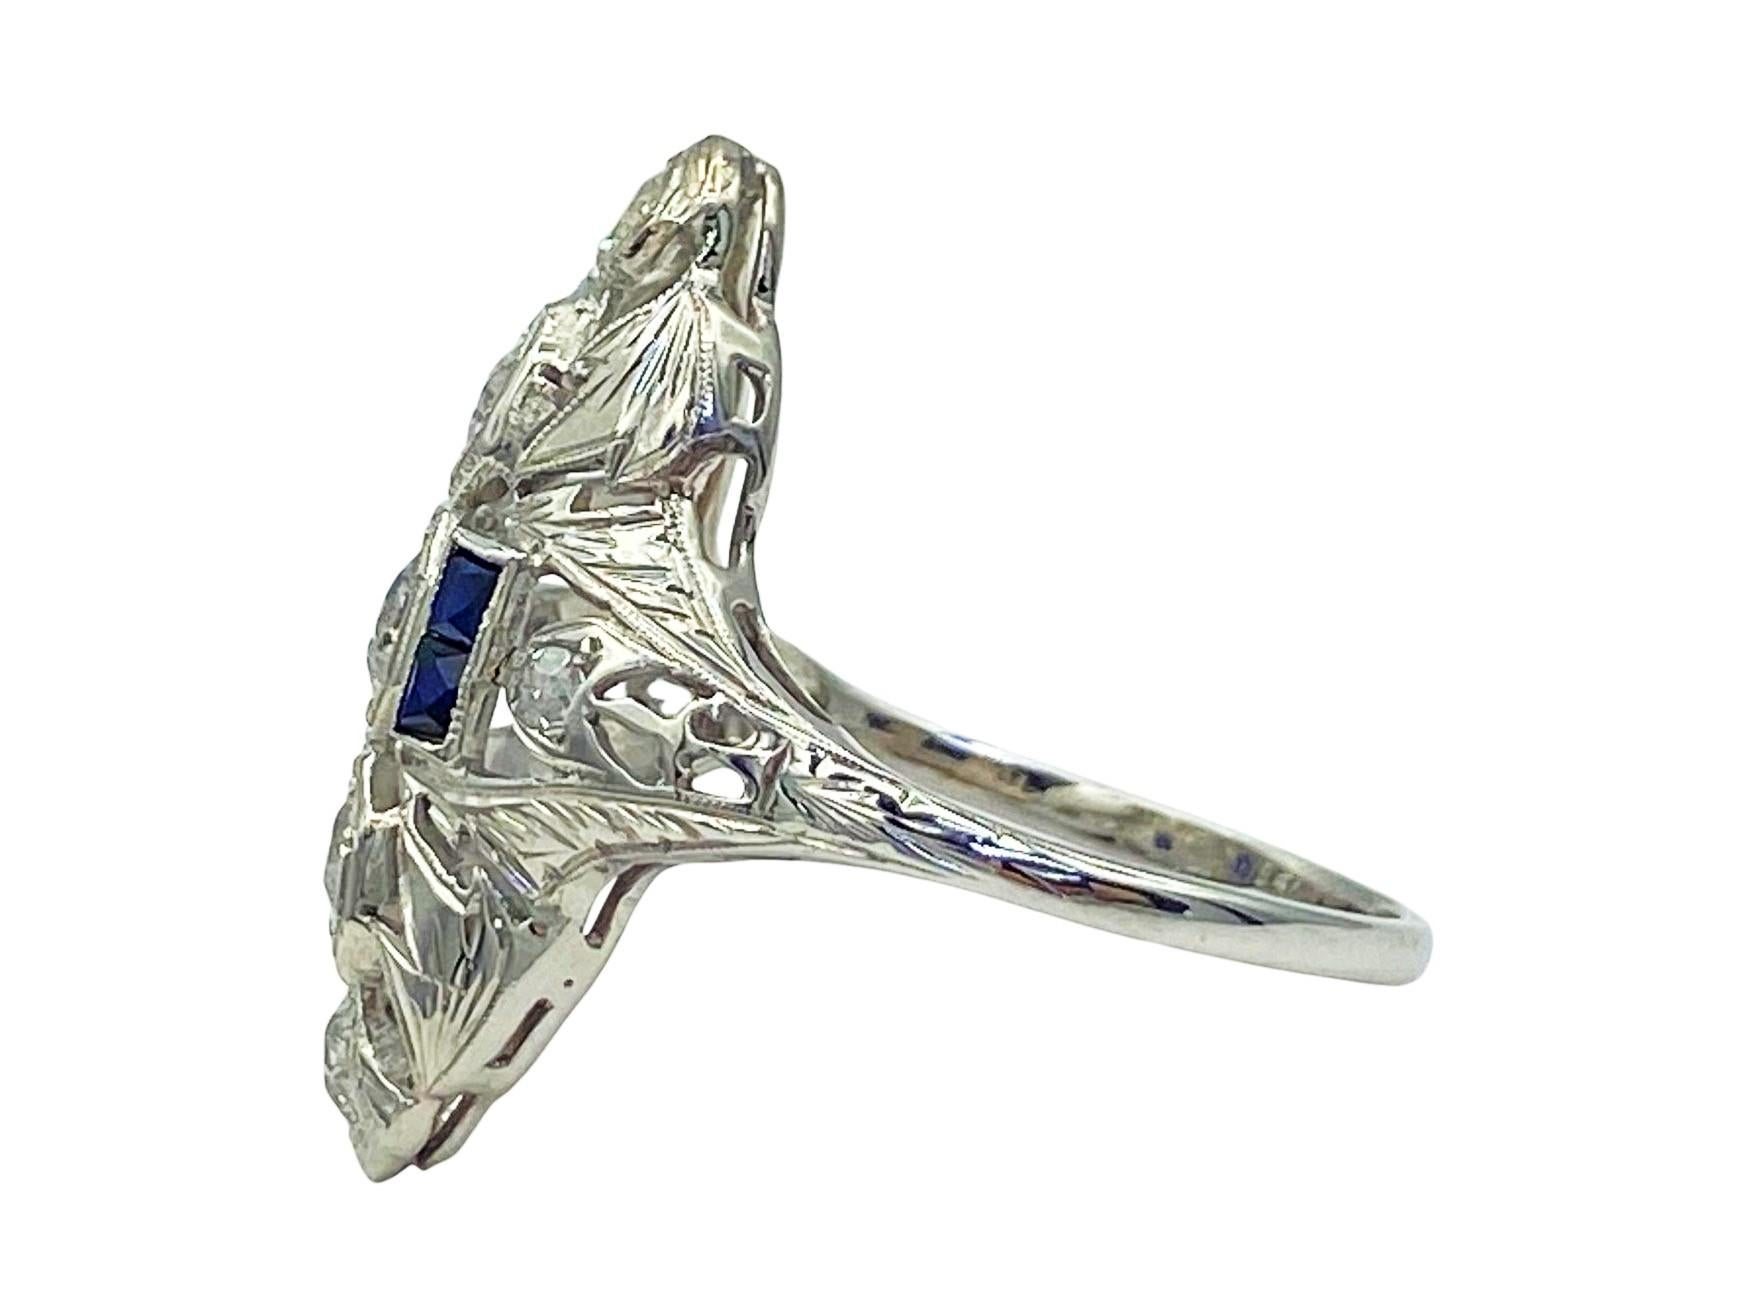 Antique Art Deco 1.5cttw Diamond + Sapphire 18k Gold Shield Cocktail Ring, 1920s In Good Condition For Sale In North Attleboro, MA